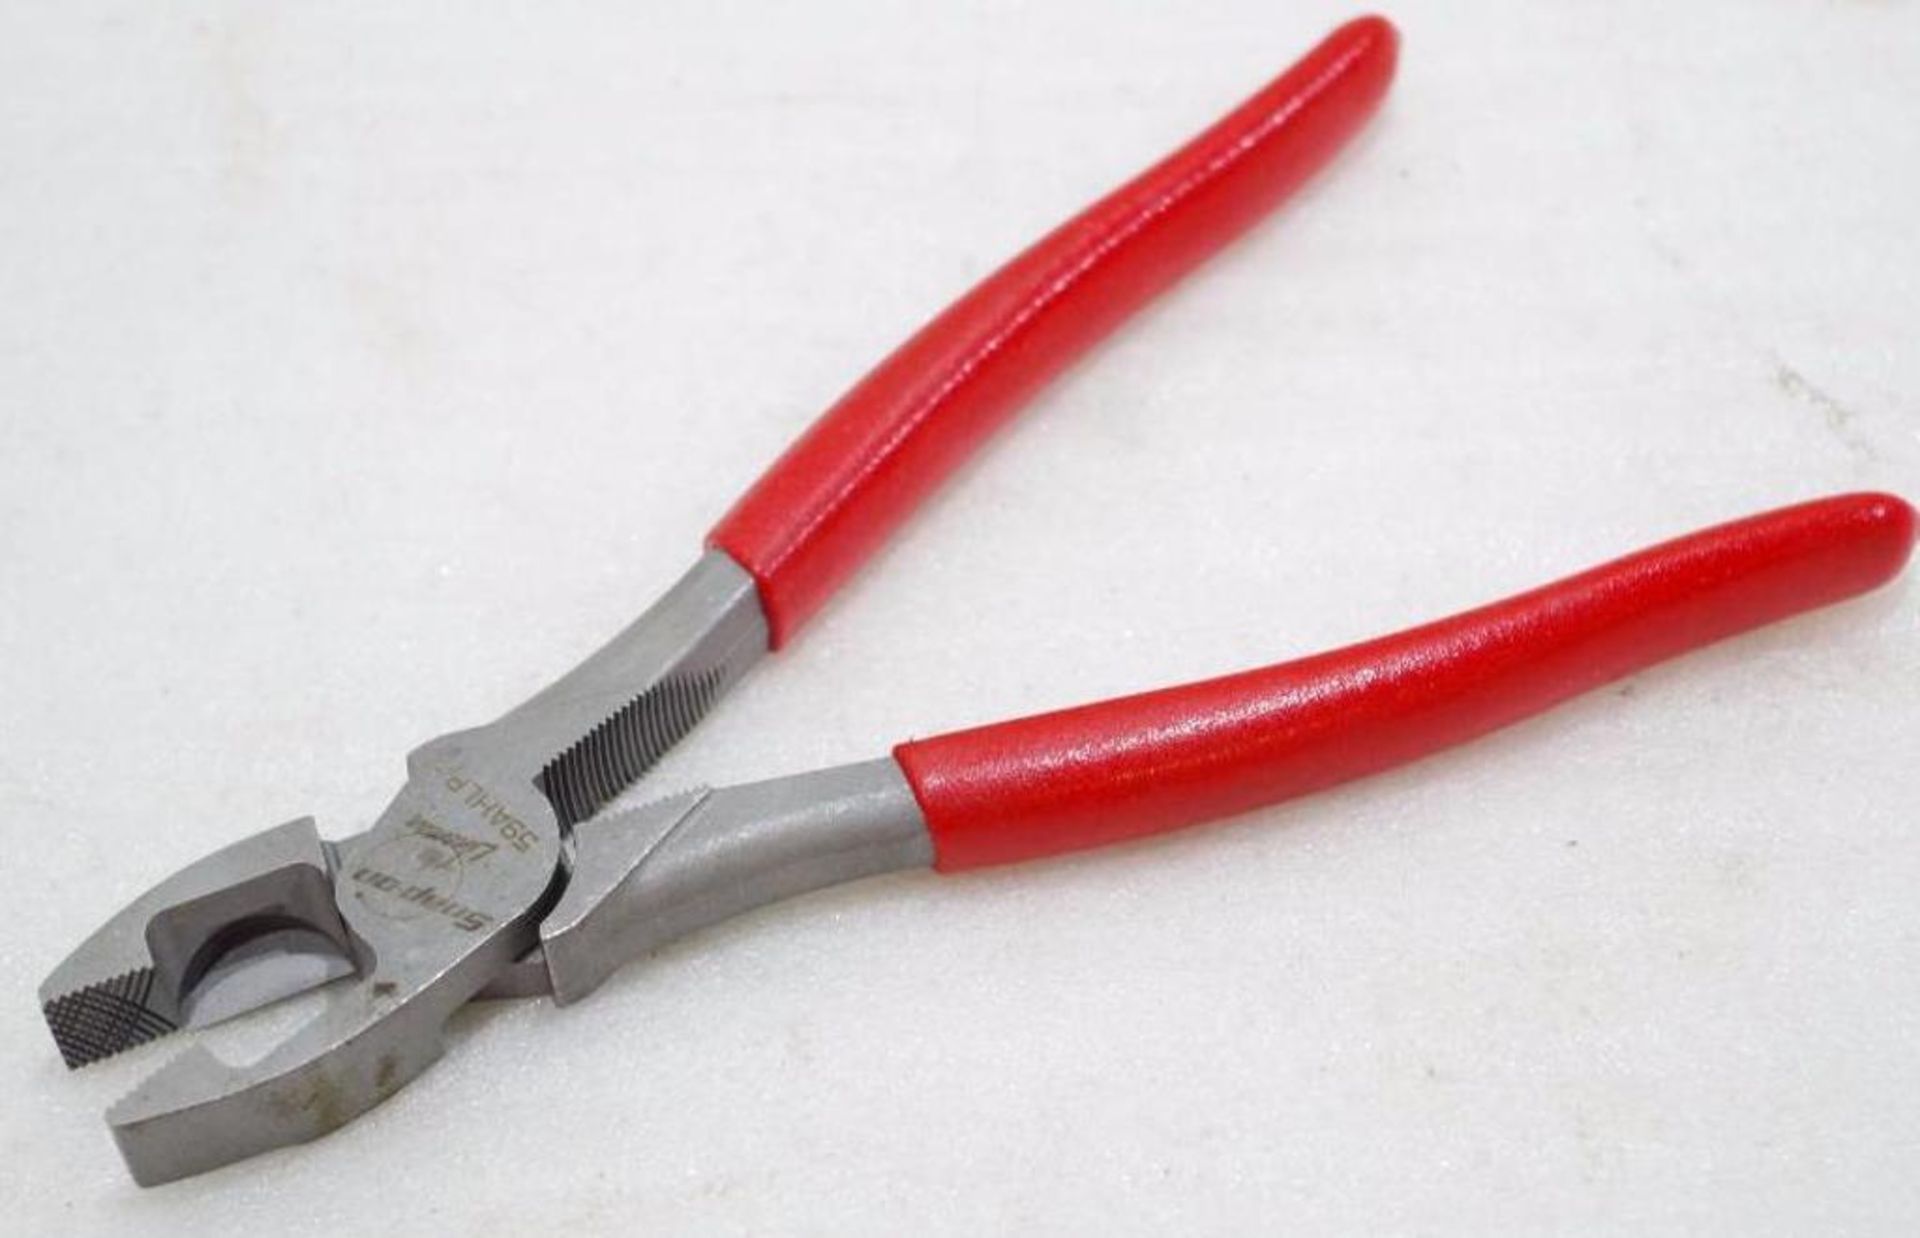 NEW SNAP-ON Lineman's Pliers, M/N 59AHLP, Made in USA - Image 2 of 5